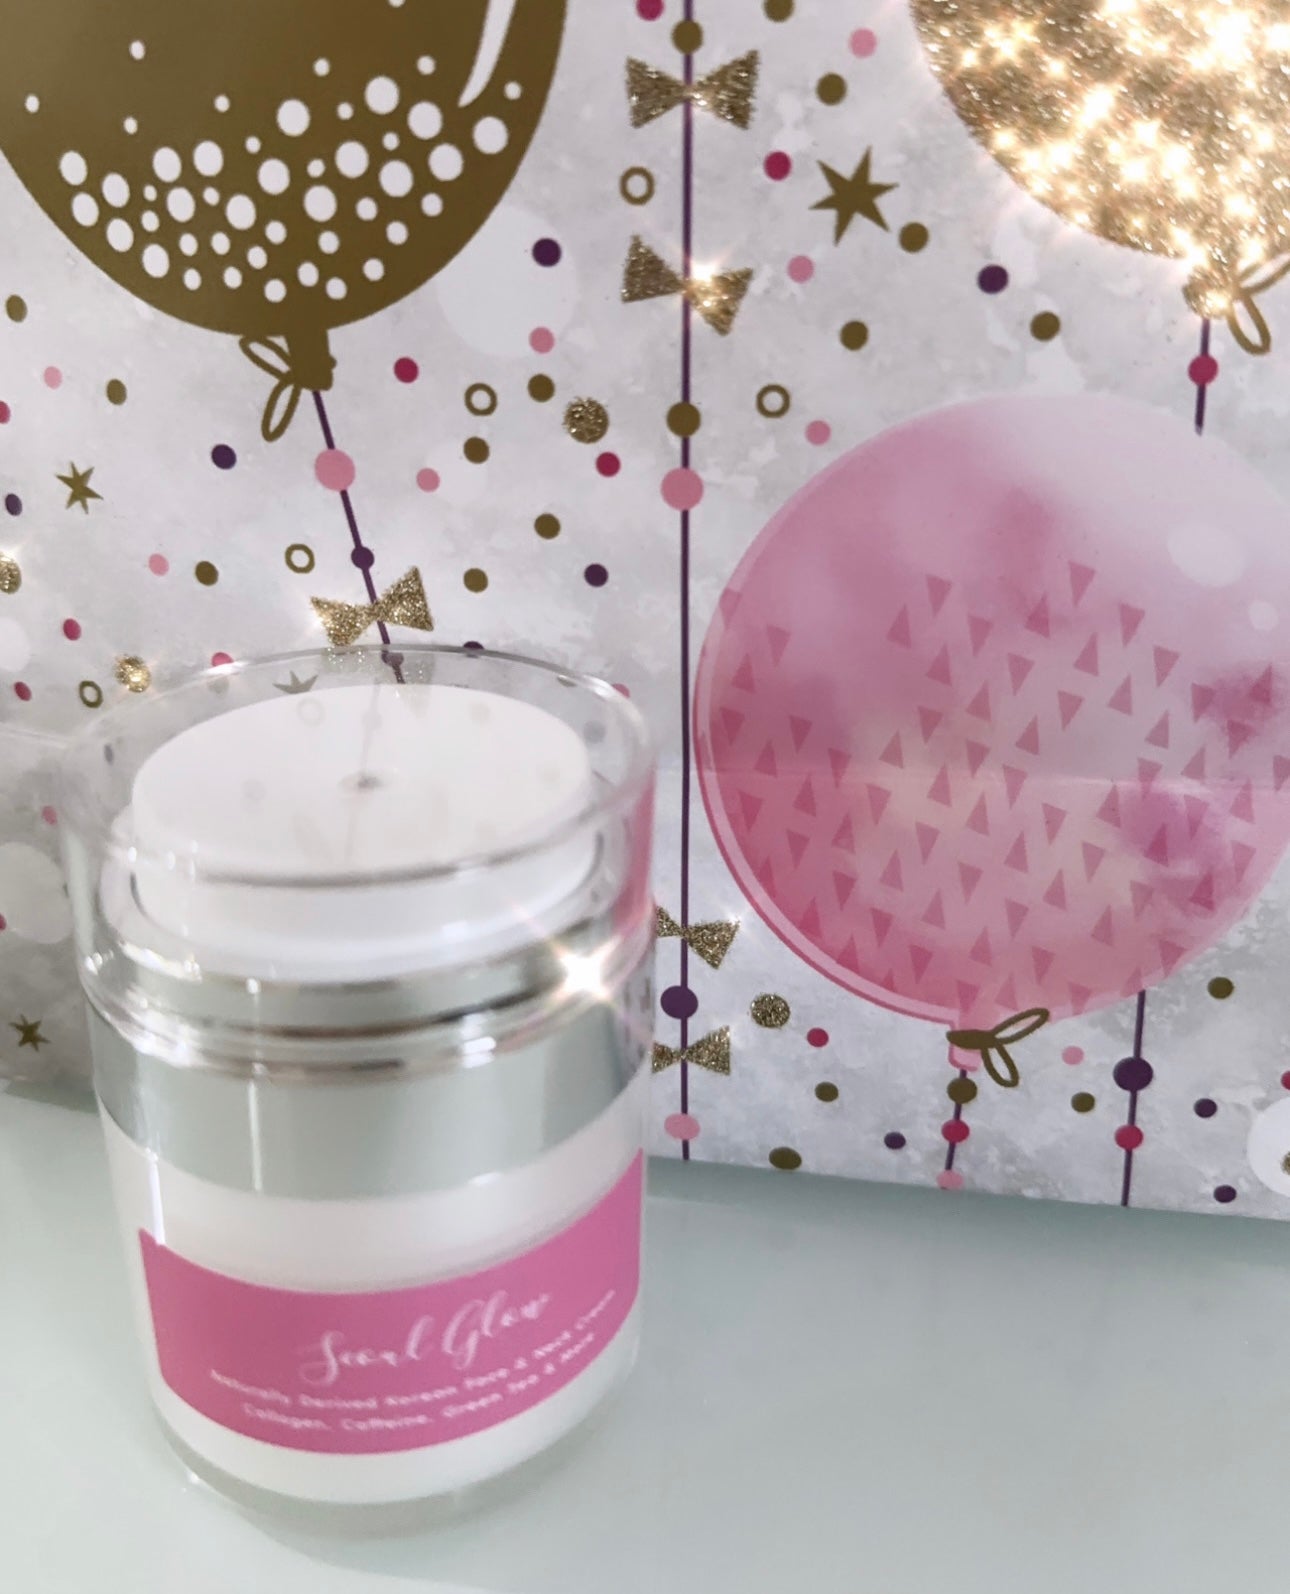 Seoul Glow (all in one face & neck cream)